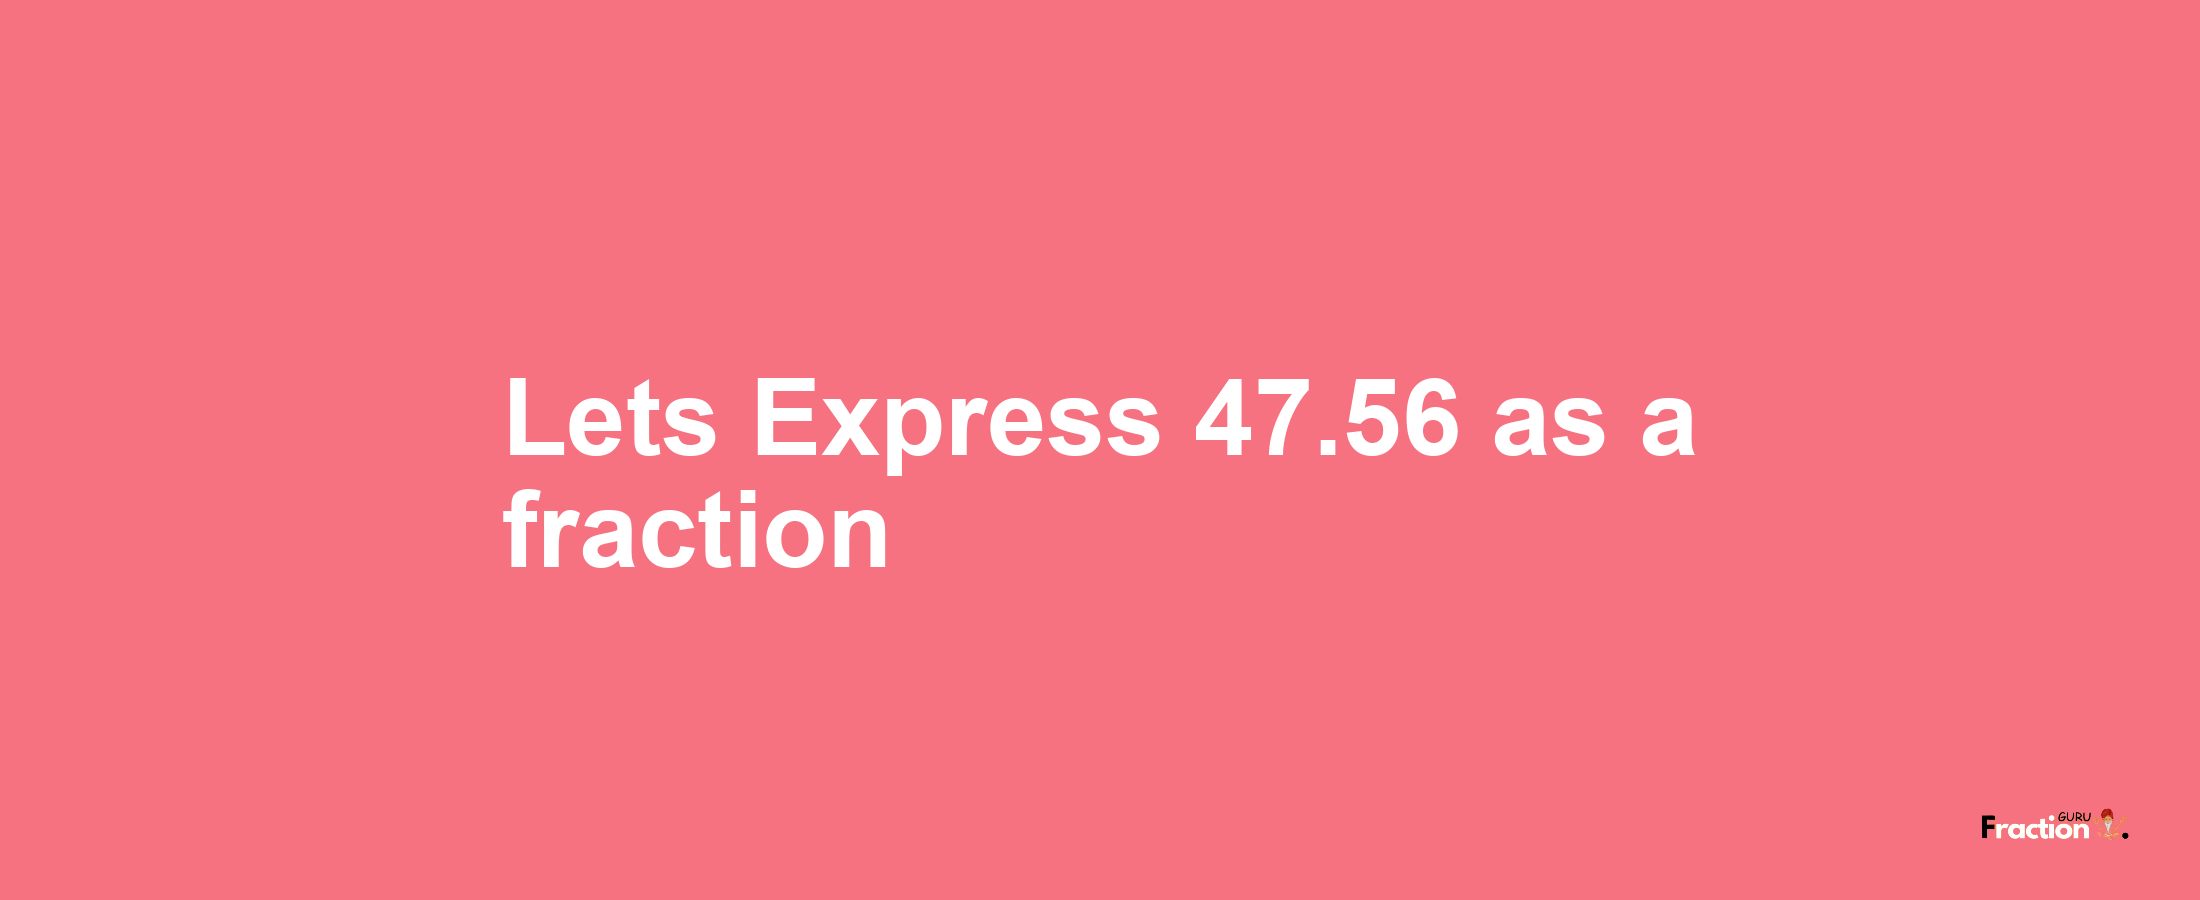 Lets Express 47.56 as afraction